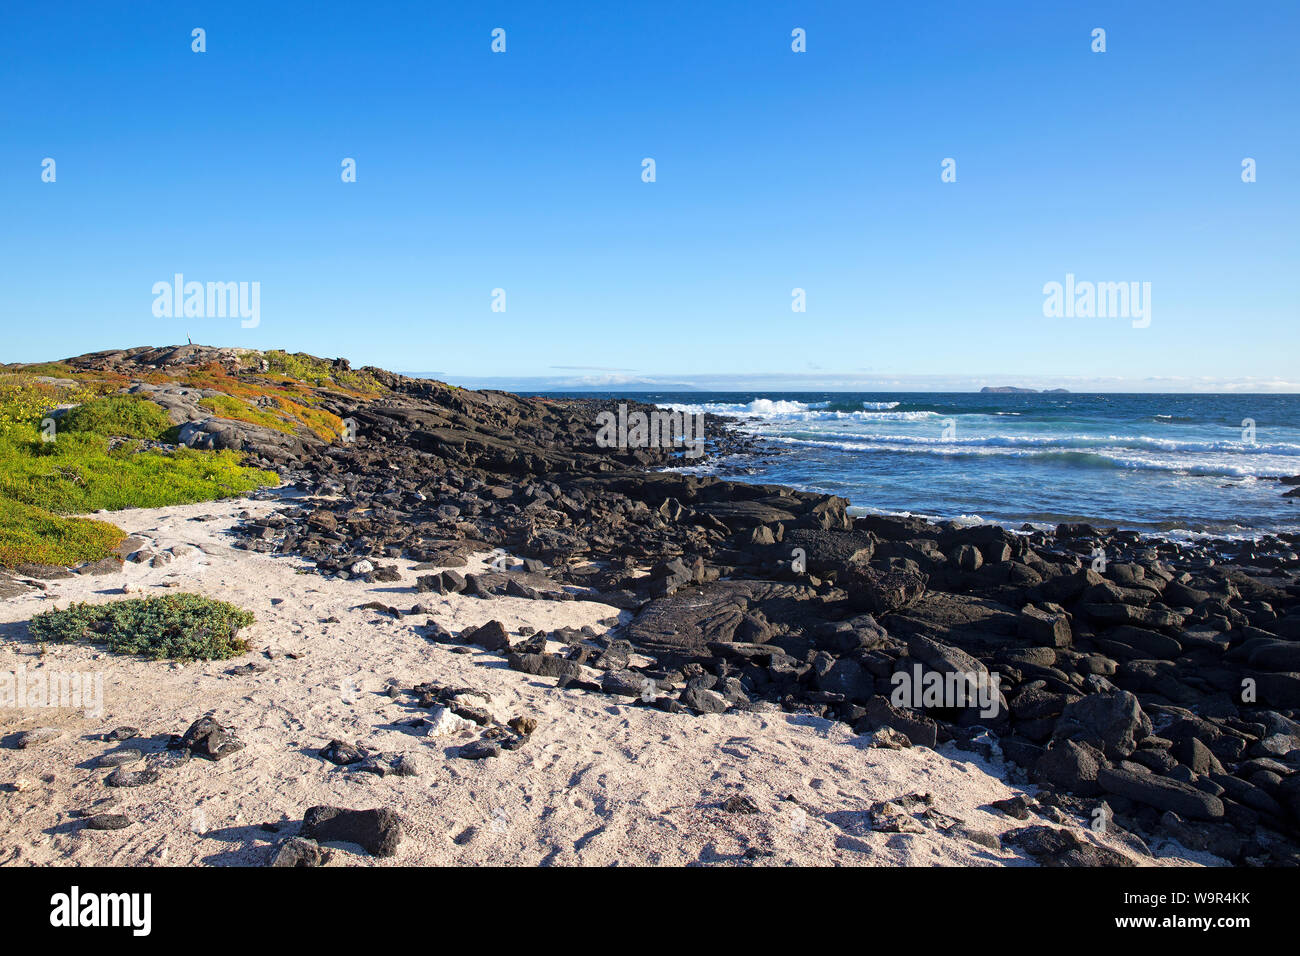 Galapagos islands landscape taken in the day Stock Photo